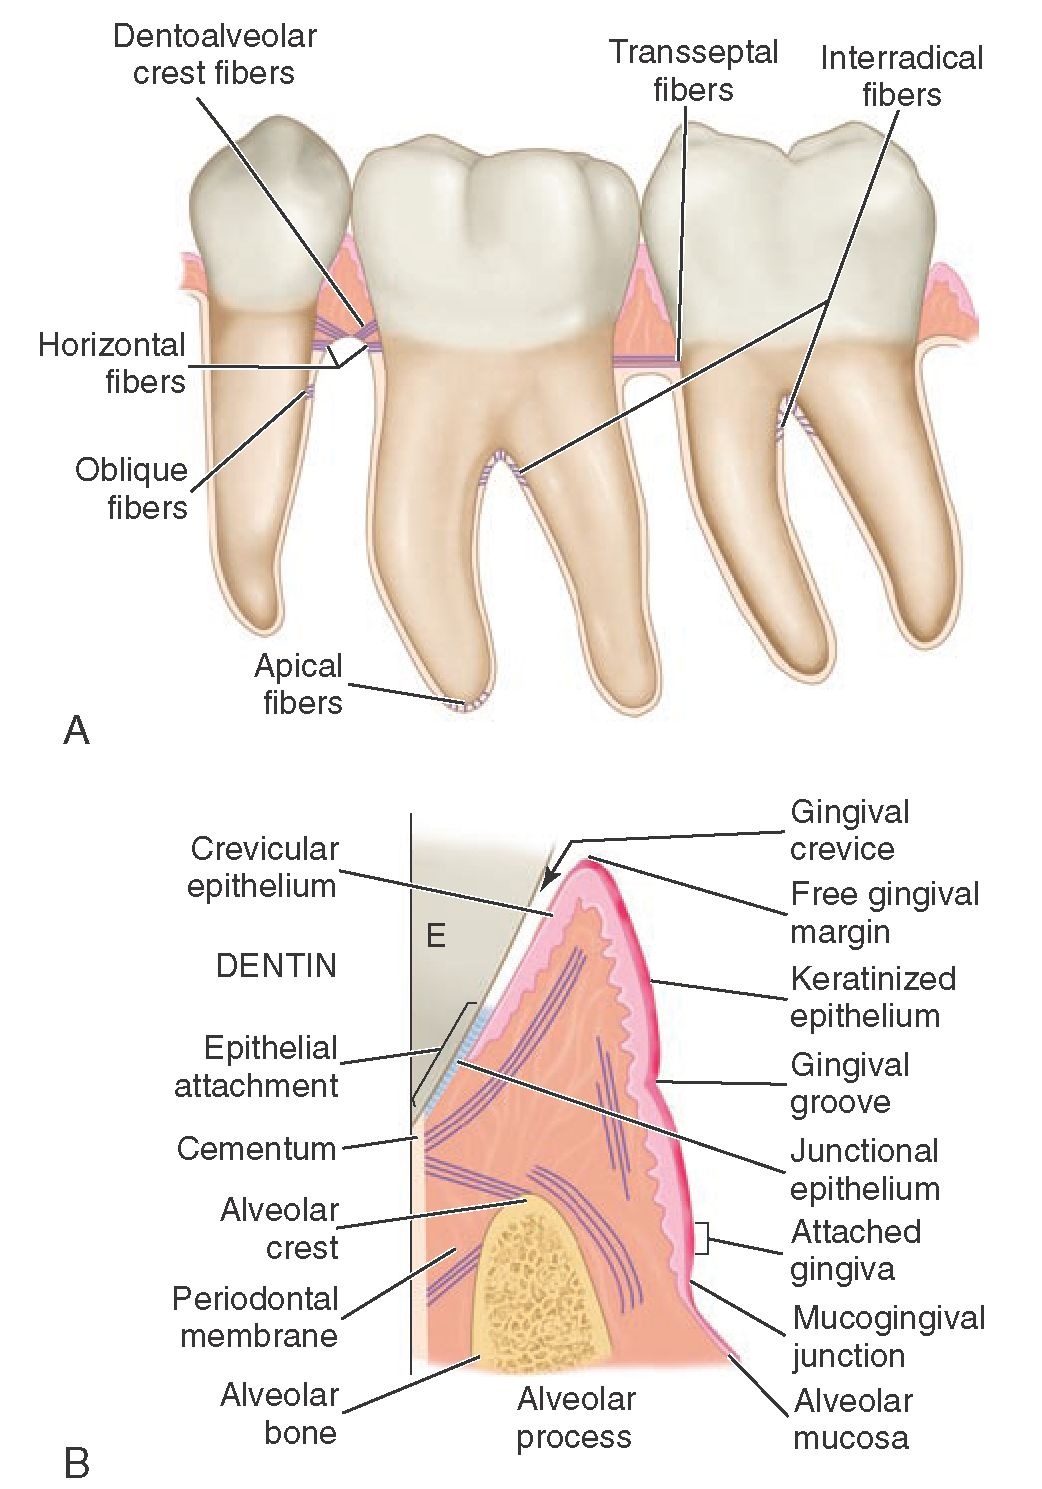 A, Principal fibers of the supporting structures. B, Schematic representation of periodontal structure at the junction of the enamel, cementum, and dentin showing attachment of gingival tissue to the tooth via the junctional epithelium. E, Enamel.